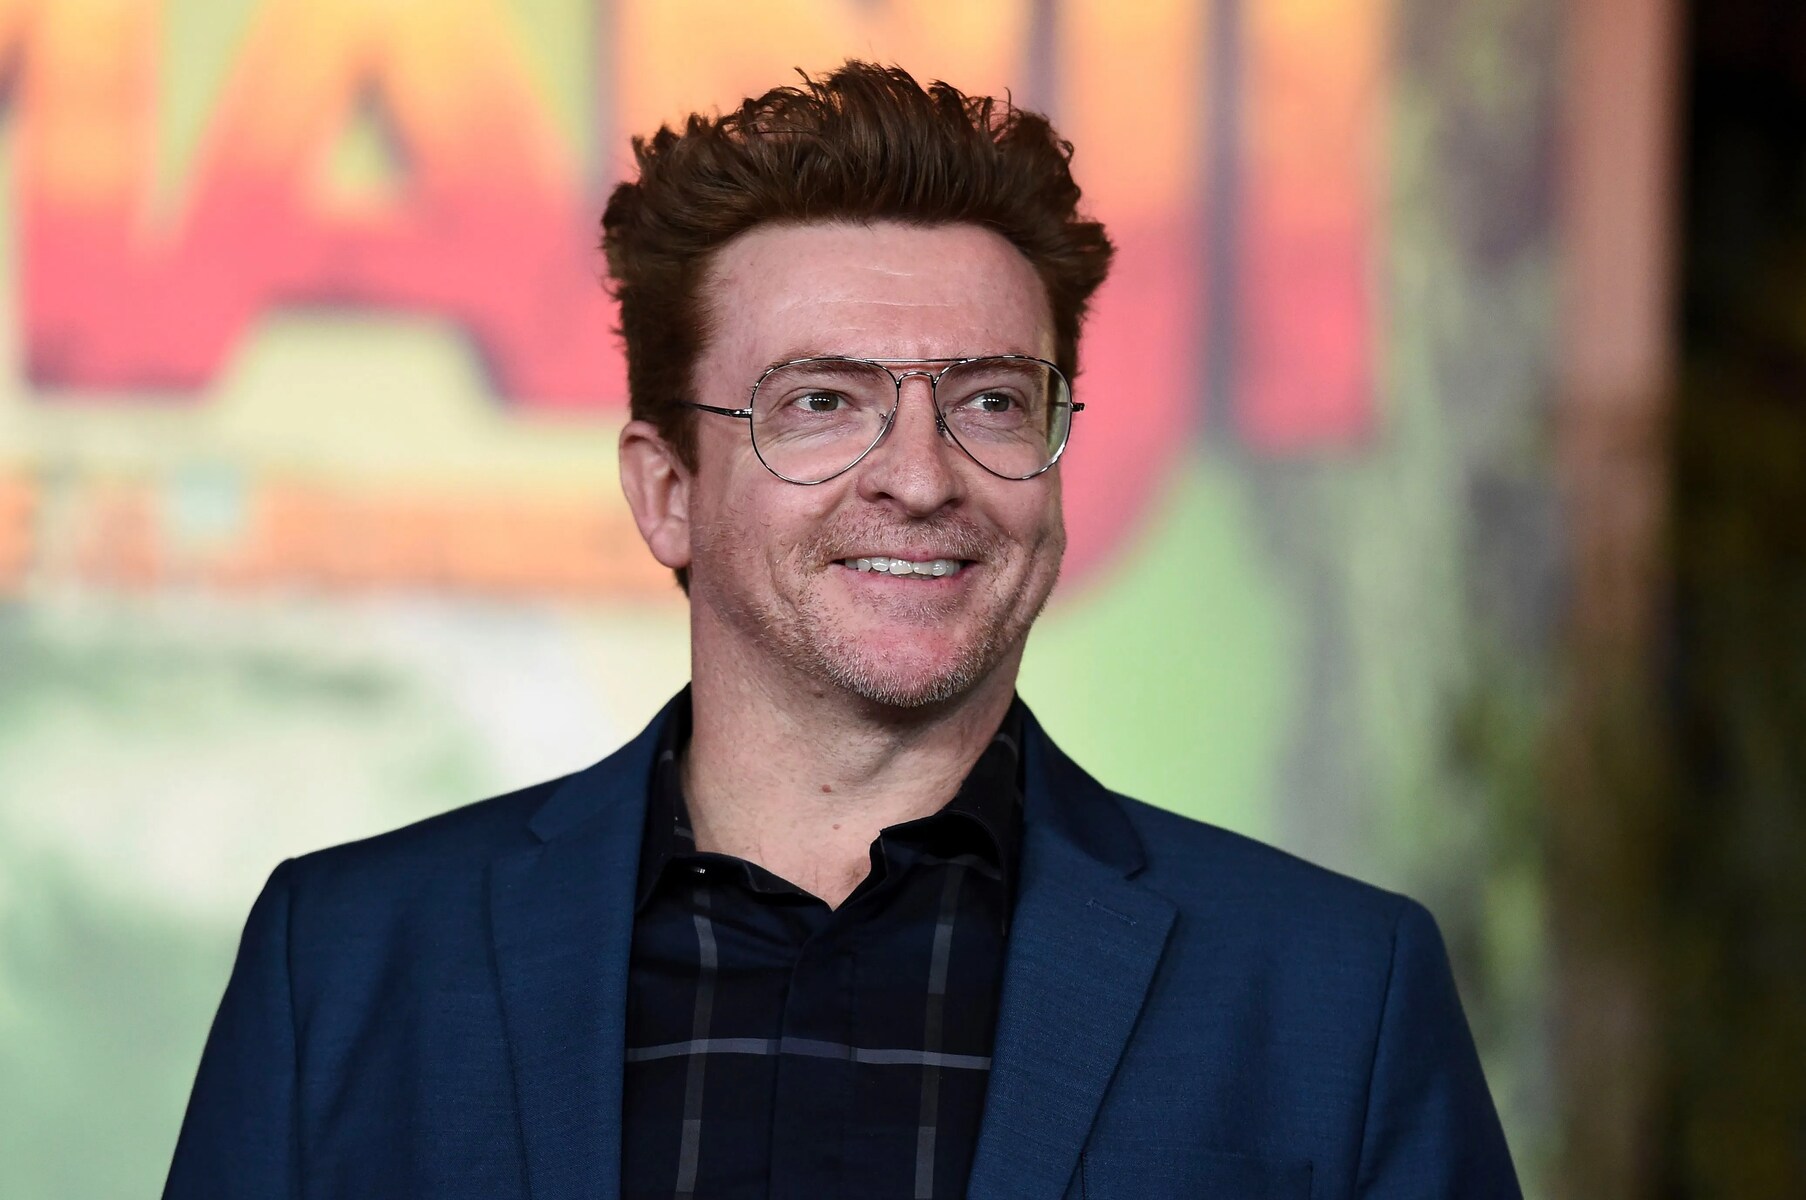 17 Surprising Facts About Rhys Darby - Facts.net